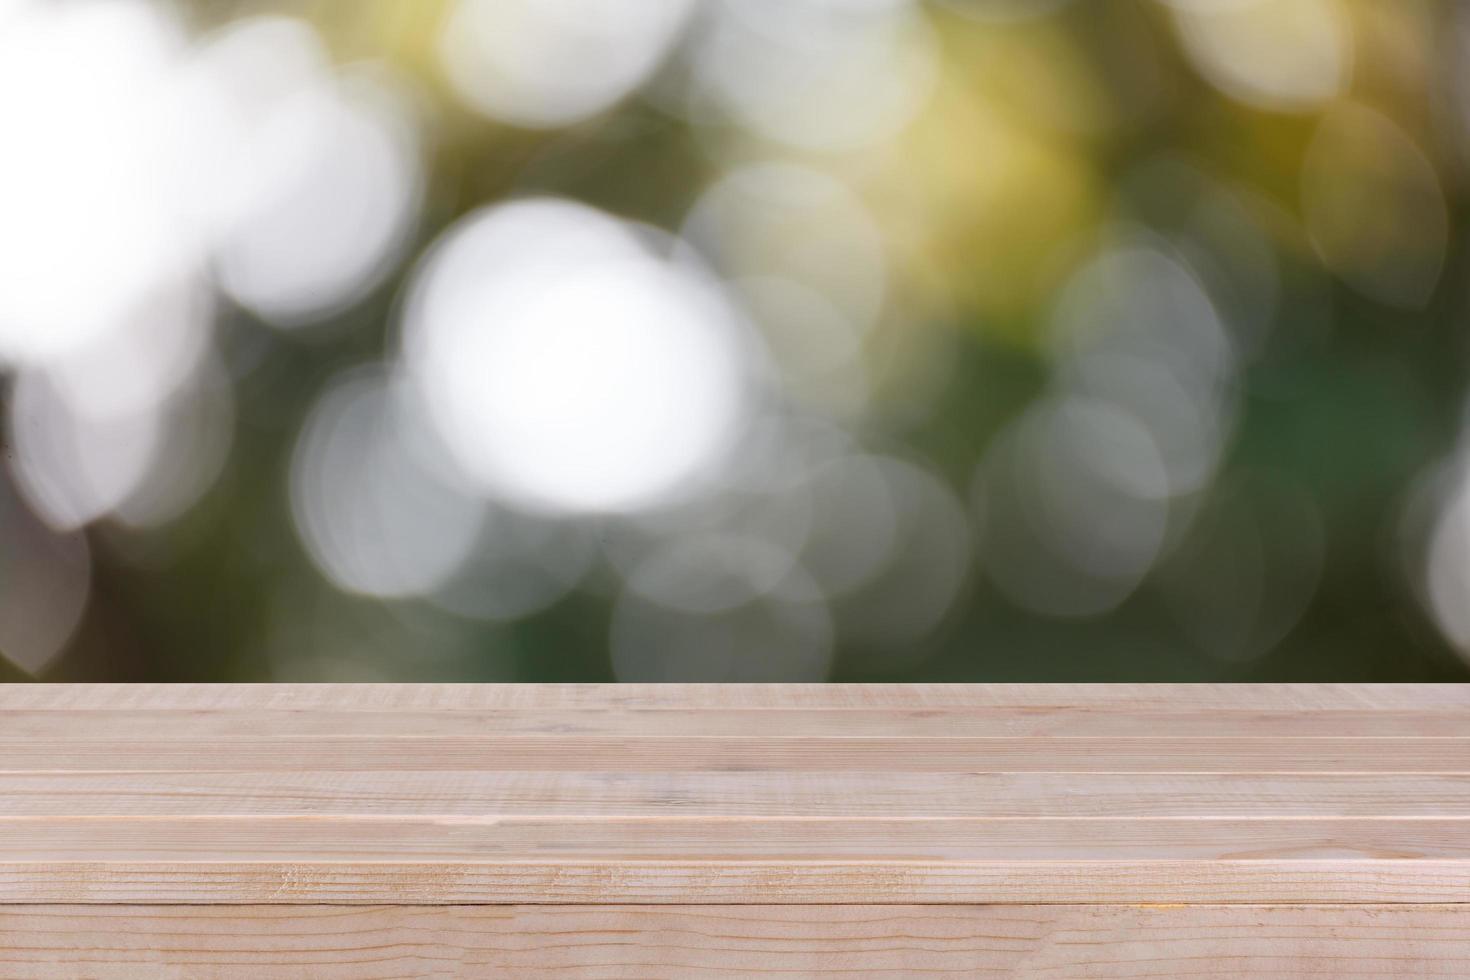 Wood table top on bokeh green background - can be used for montage or display your products photo